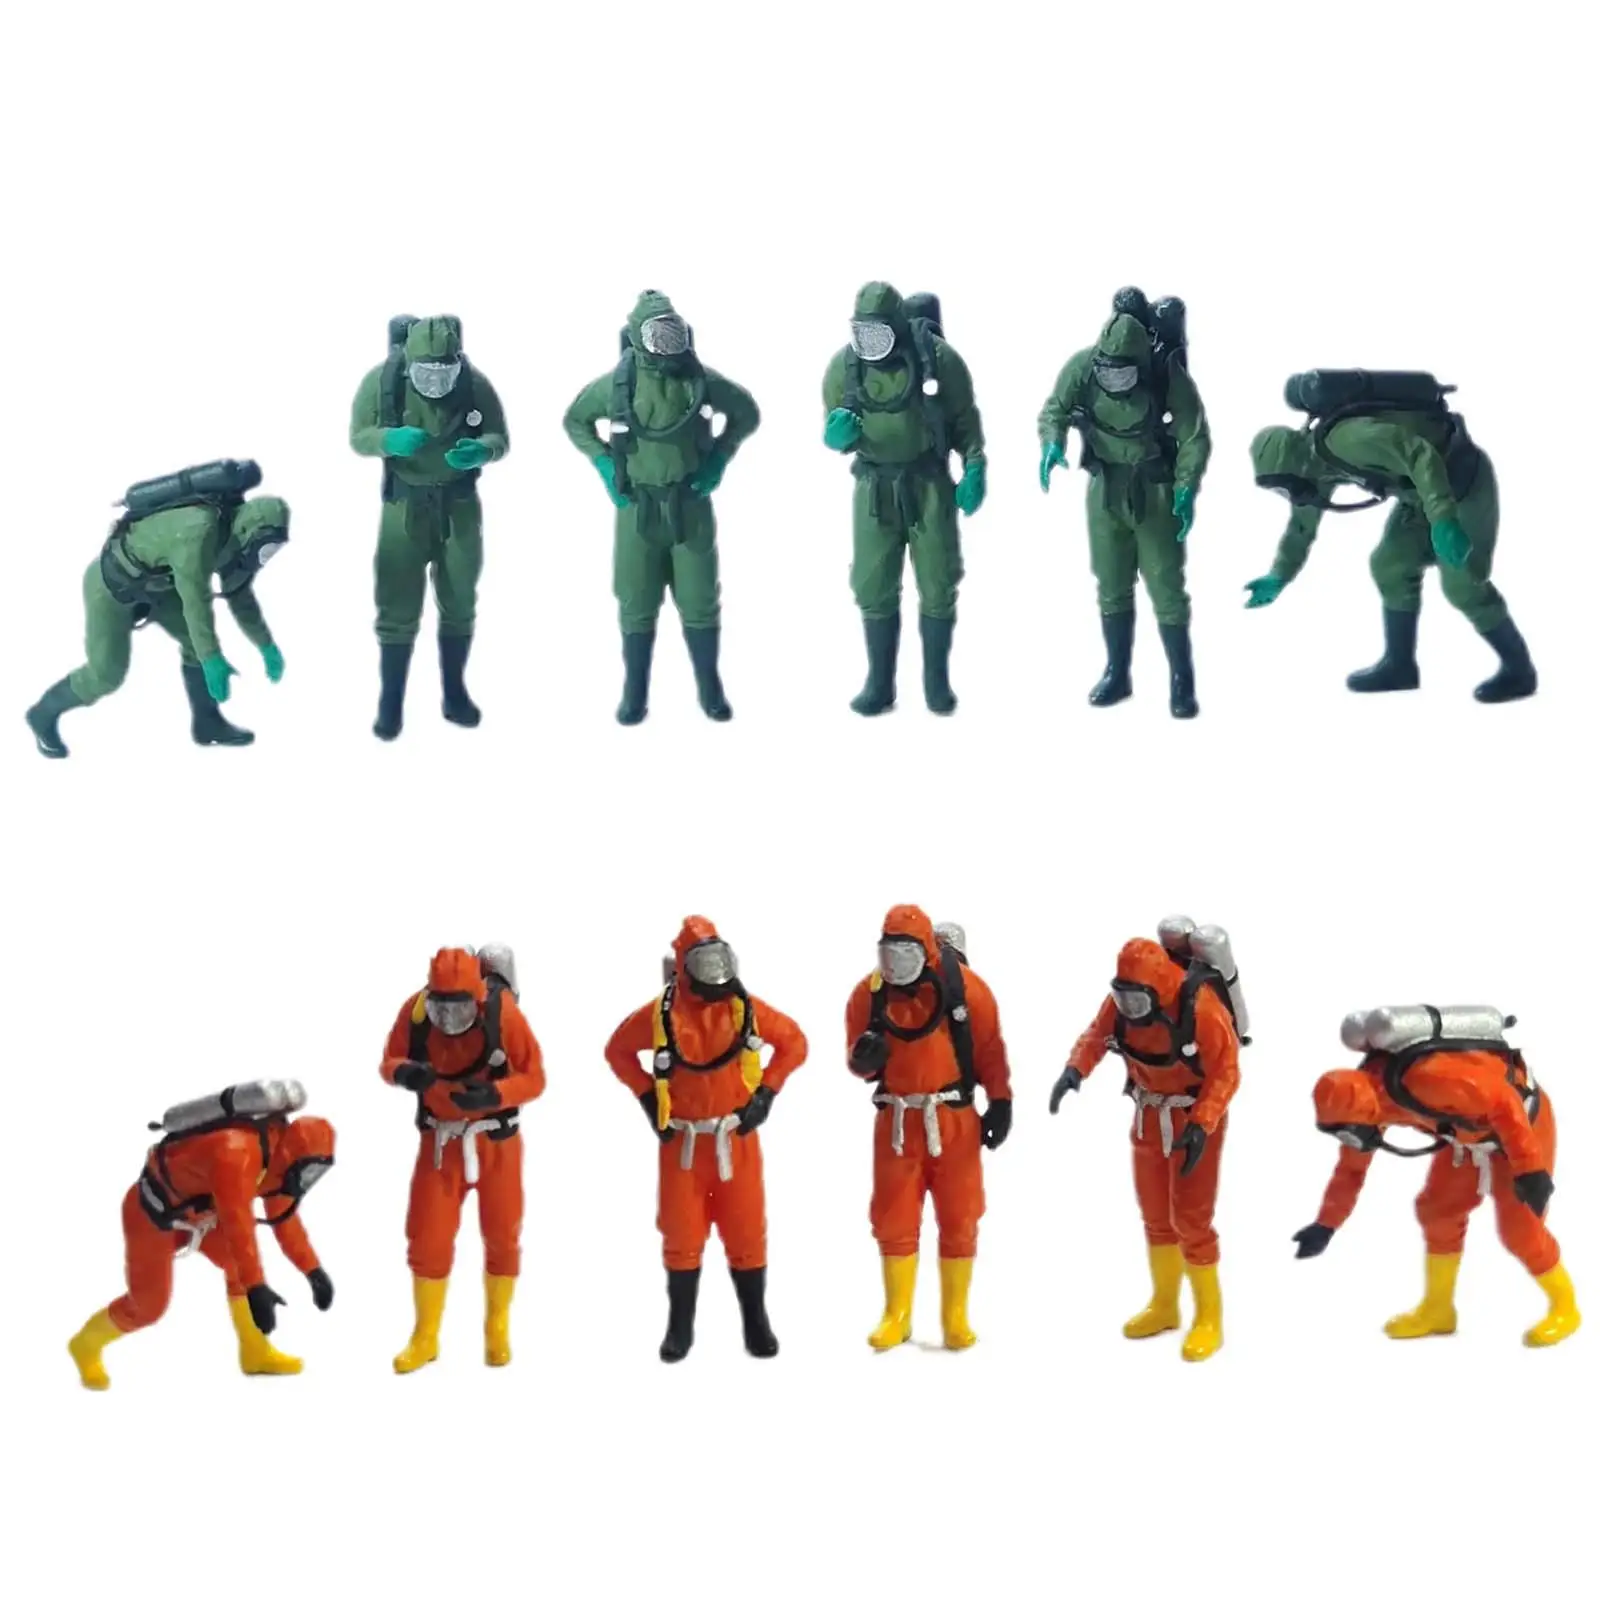 6 Pieces 1:64 People Figures Collectibles Crafts Fireman People Figures for Dollhouse Photography Props DIY Scene Layout Decor